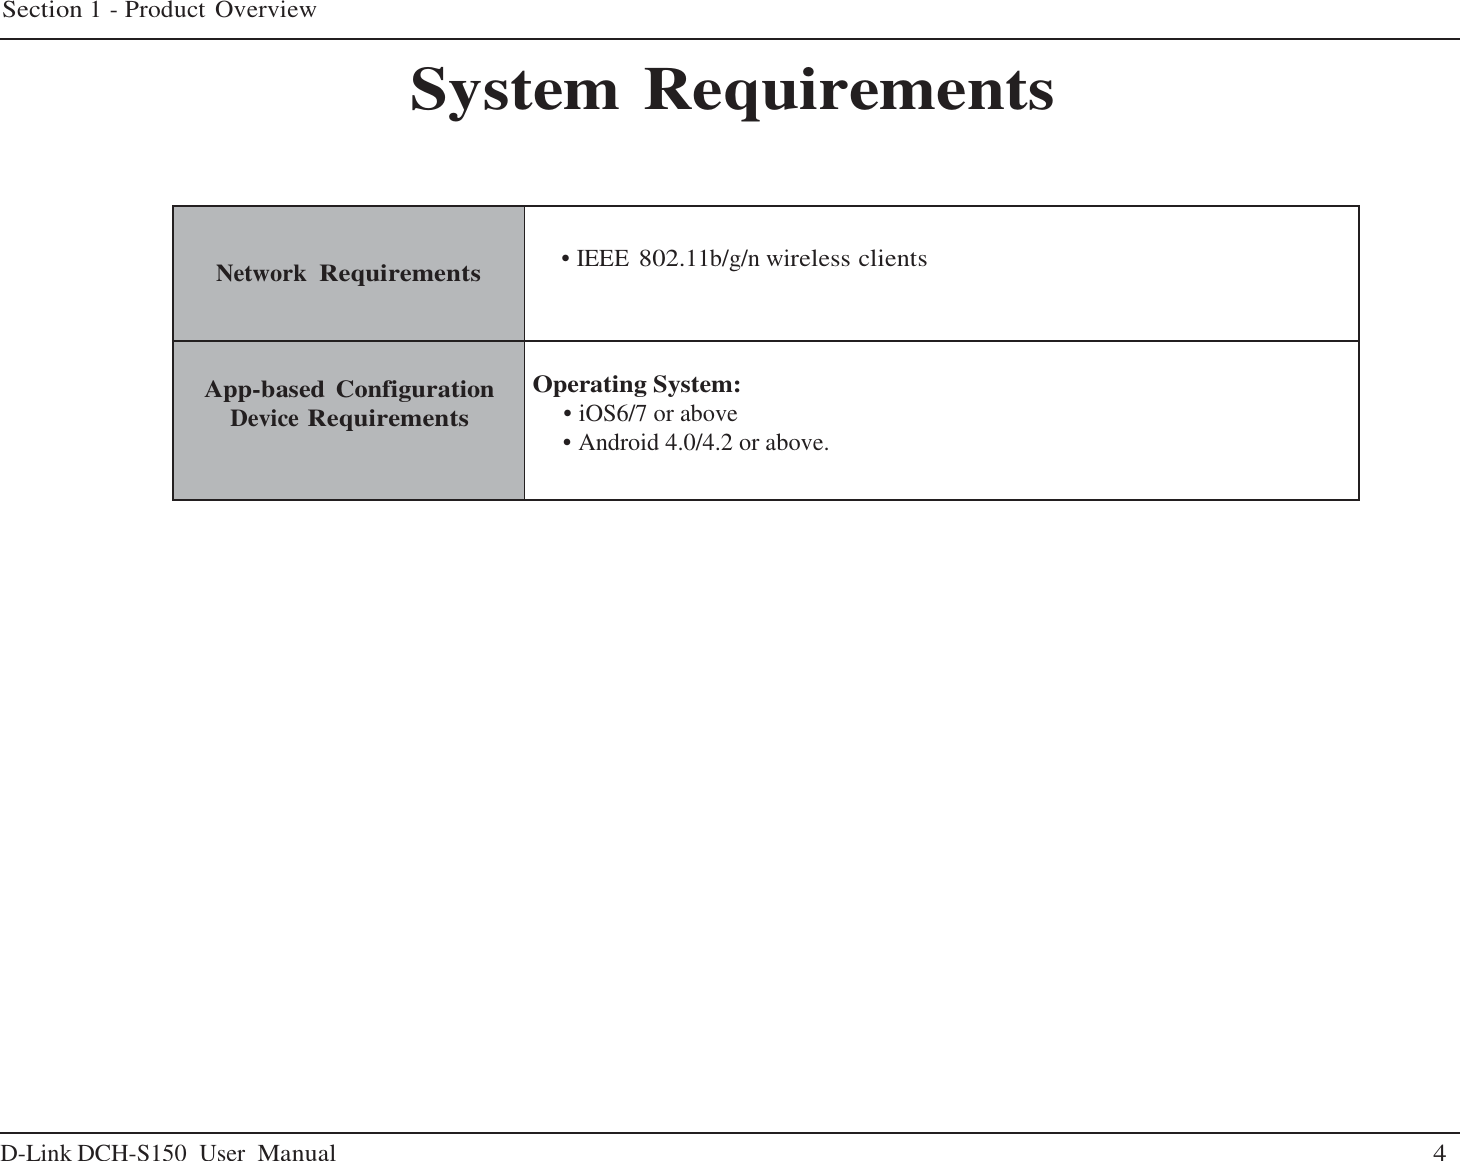 D-Link DCH-S150  User Manual 4 Section 1 - Product Overview     System Requirements        Network  Requirements   • IEEE 802.11b/g/n wireless clients   App-based Configuration Device Requirements  Operating System:        • iOS6/7 or above      • Android 4.0/4.2 or above. 